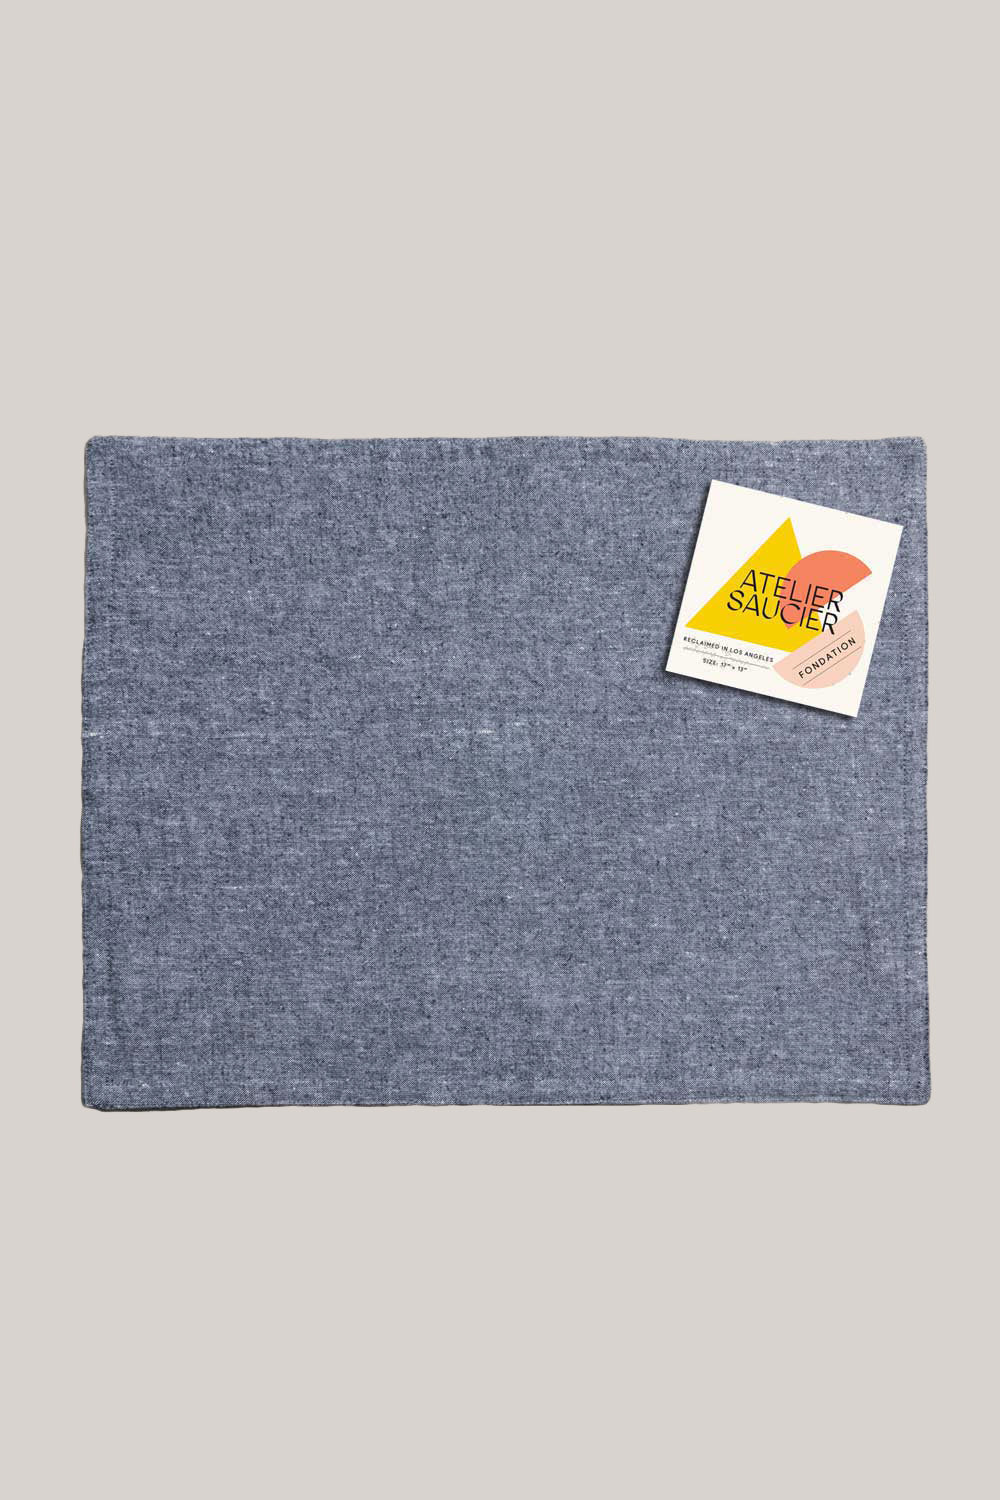 Atelier Saucier Charcoal Chambray Placemat